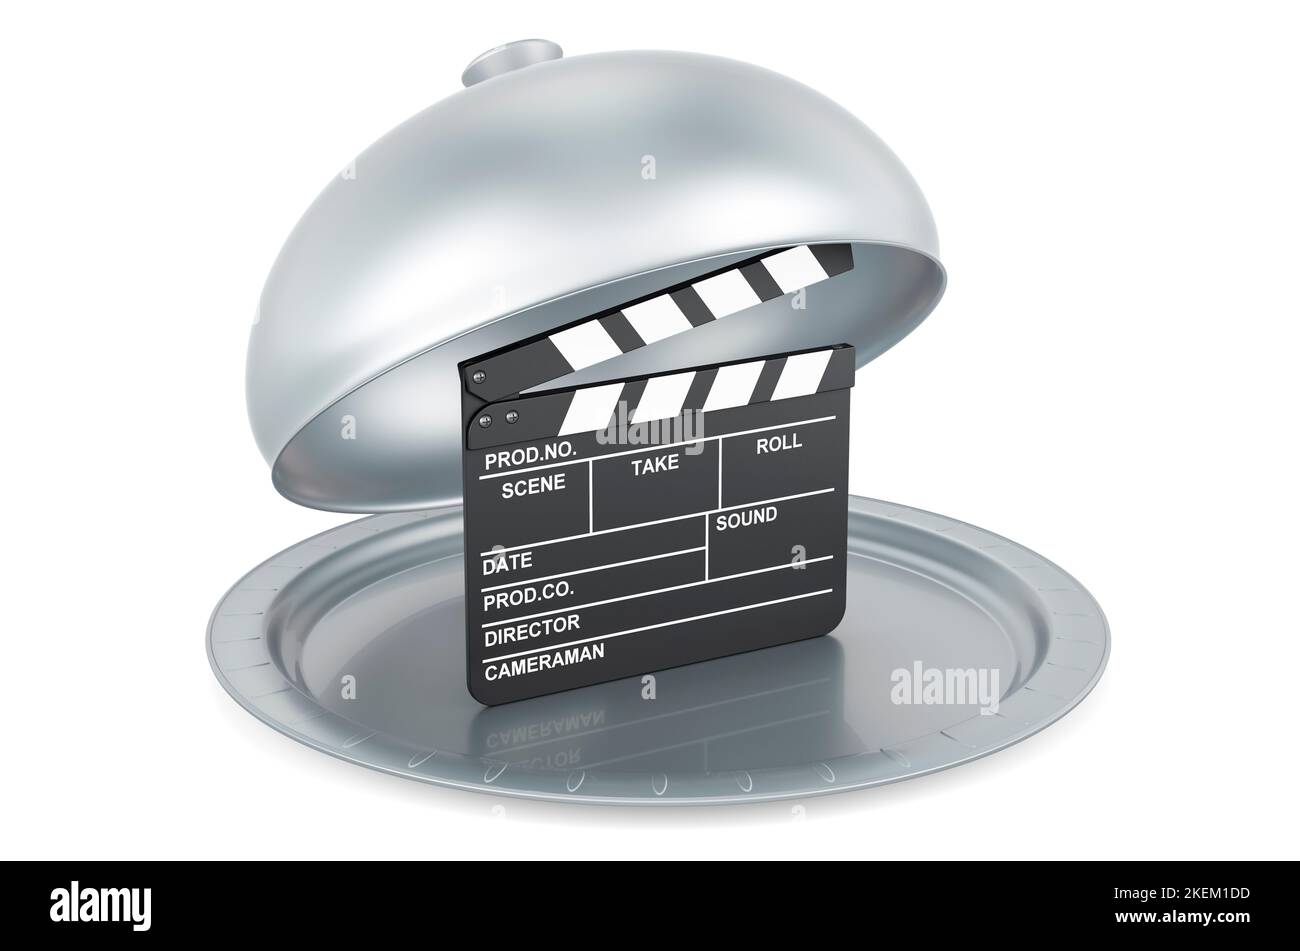 Restaurant cloche with clapperboard, 3D rendering isolated on white background Stock Photo